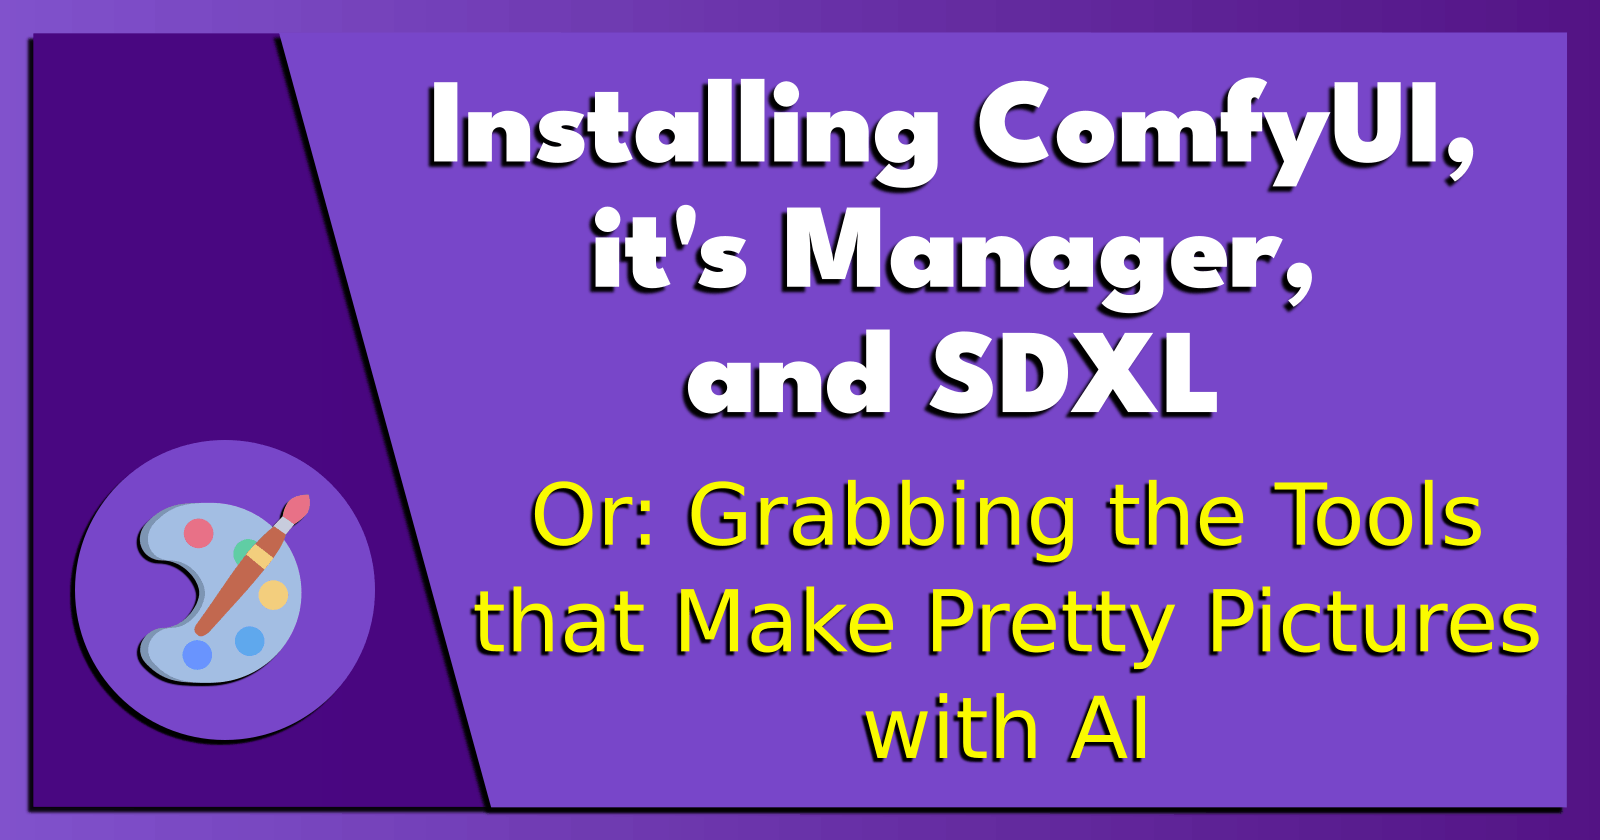 Installing ComfyUI, it's Manager, and SDXL.